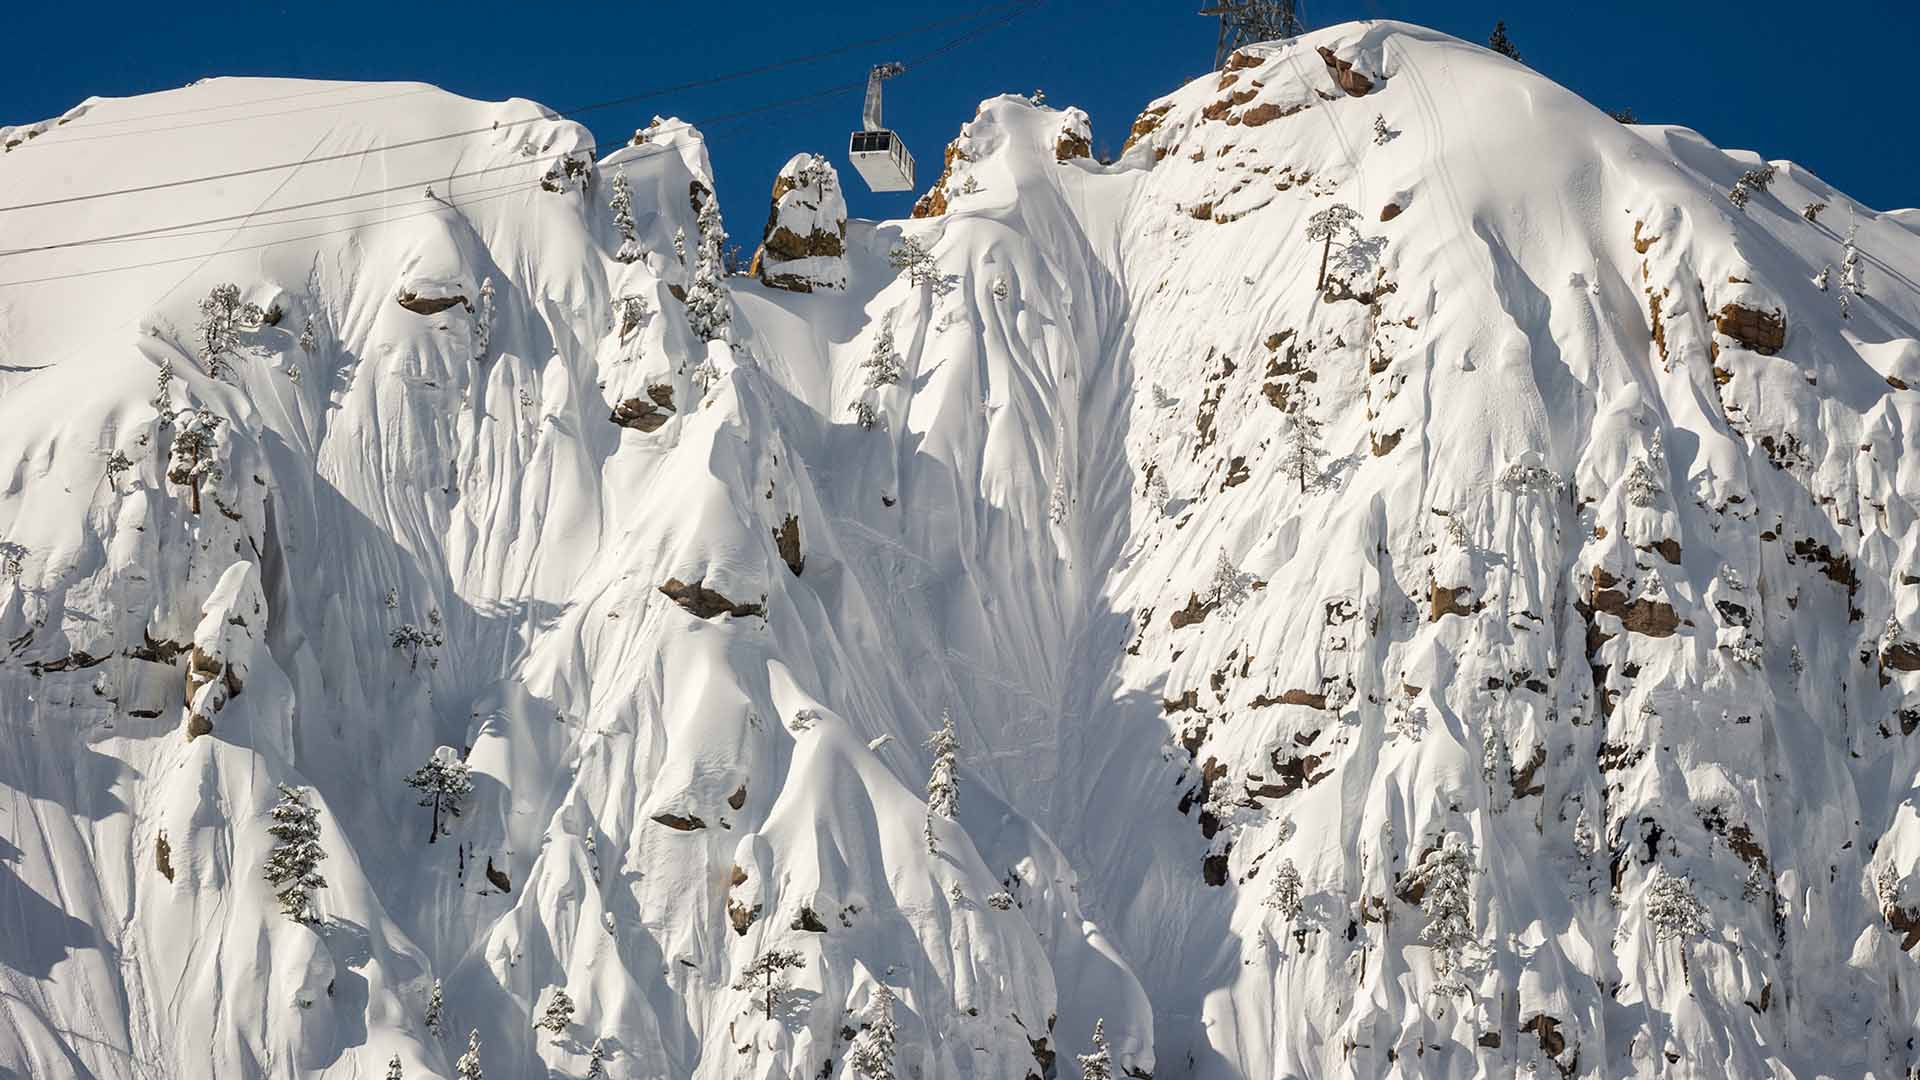 The iconic Tram Face at Palisades Tahoe, completely filled in after a heavy snowfall.